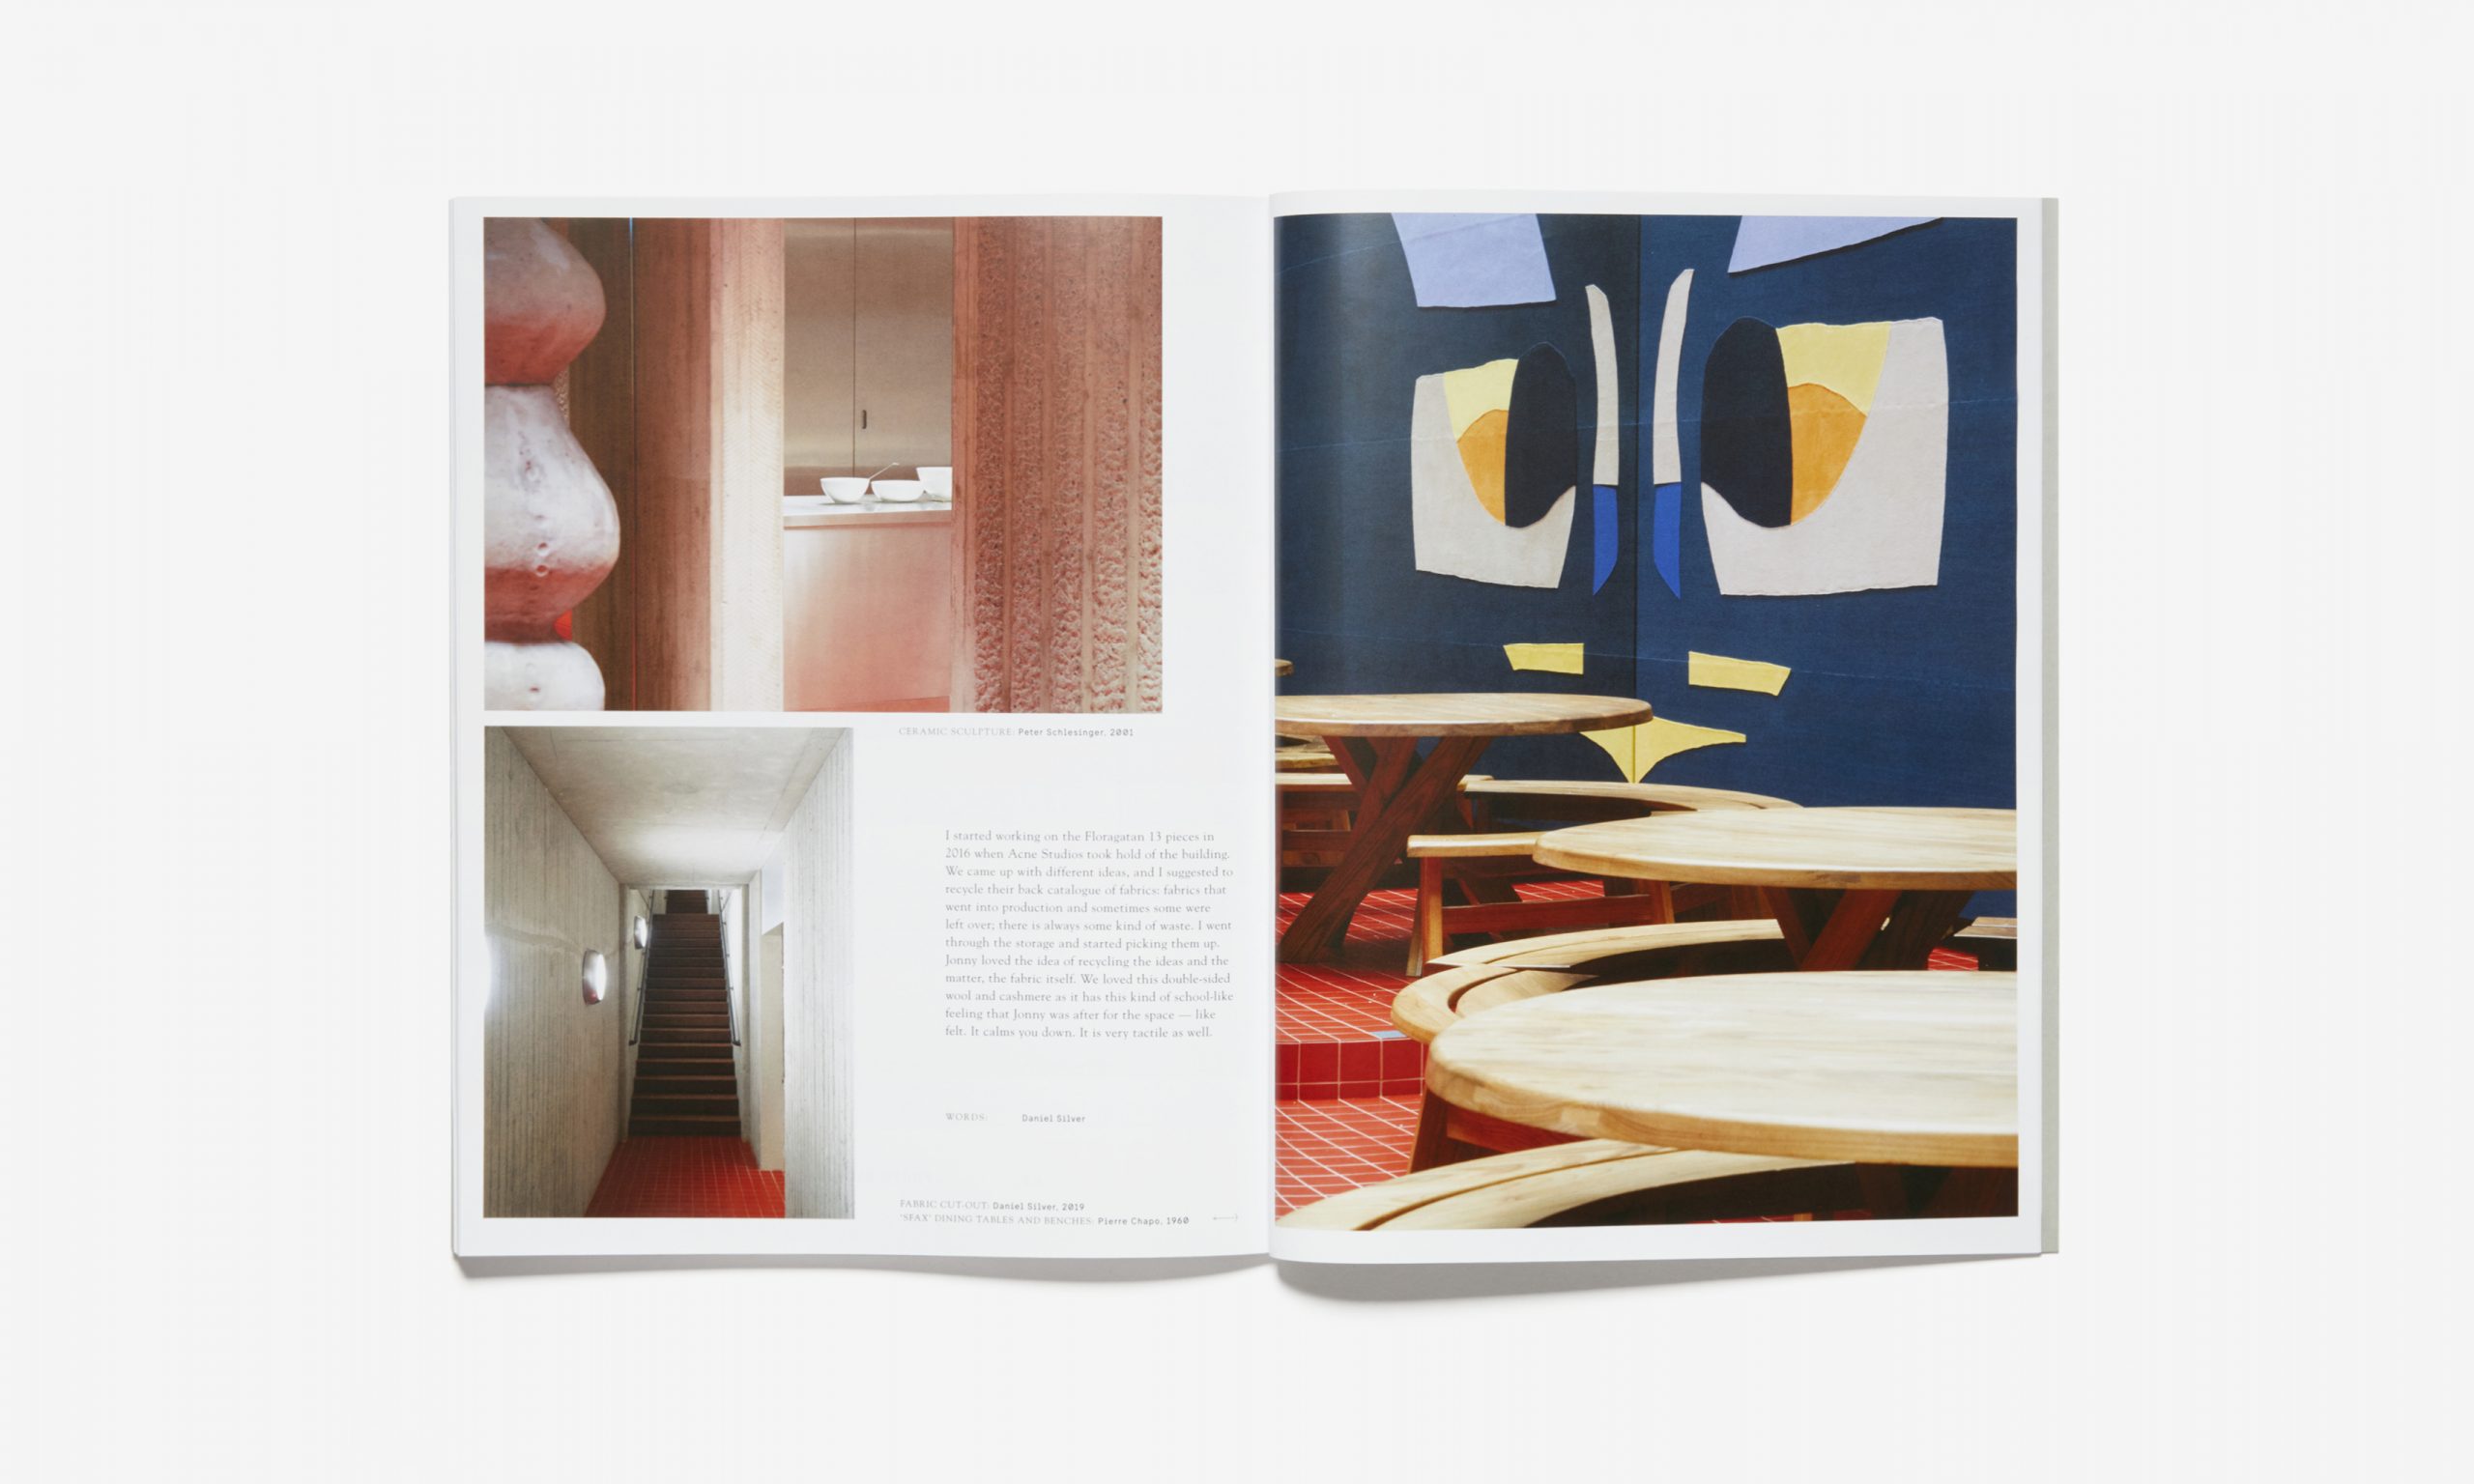 《A Magazine Curated By》发起特别项目「Floragatan 13 Curated By Acne Studios」